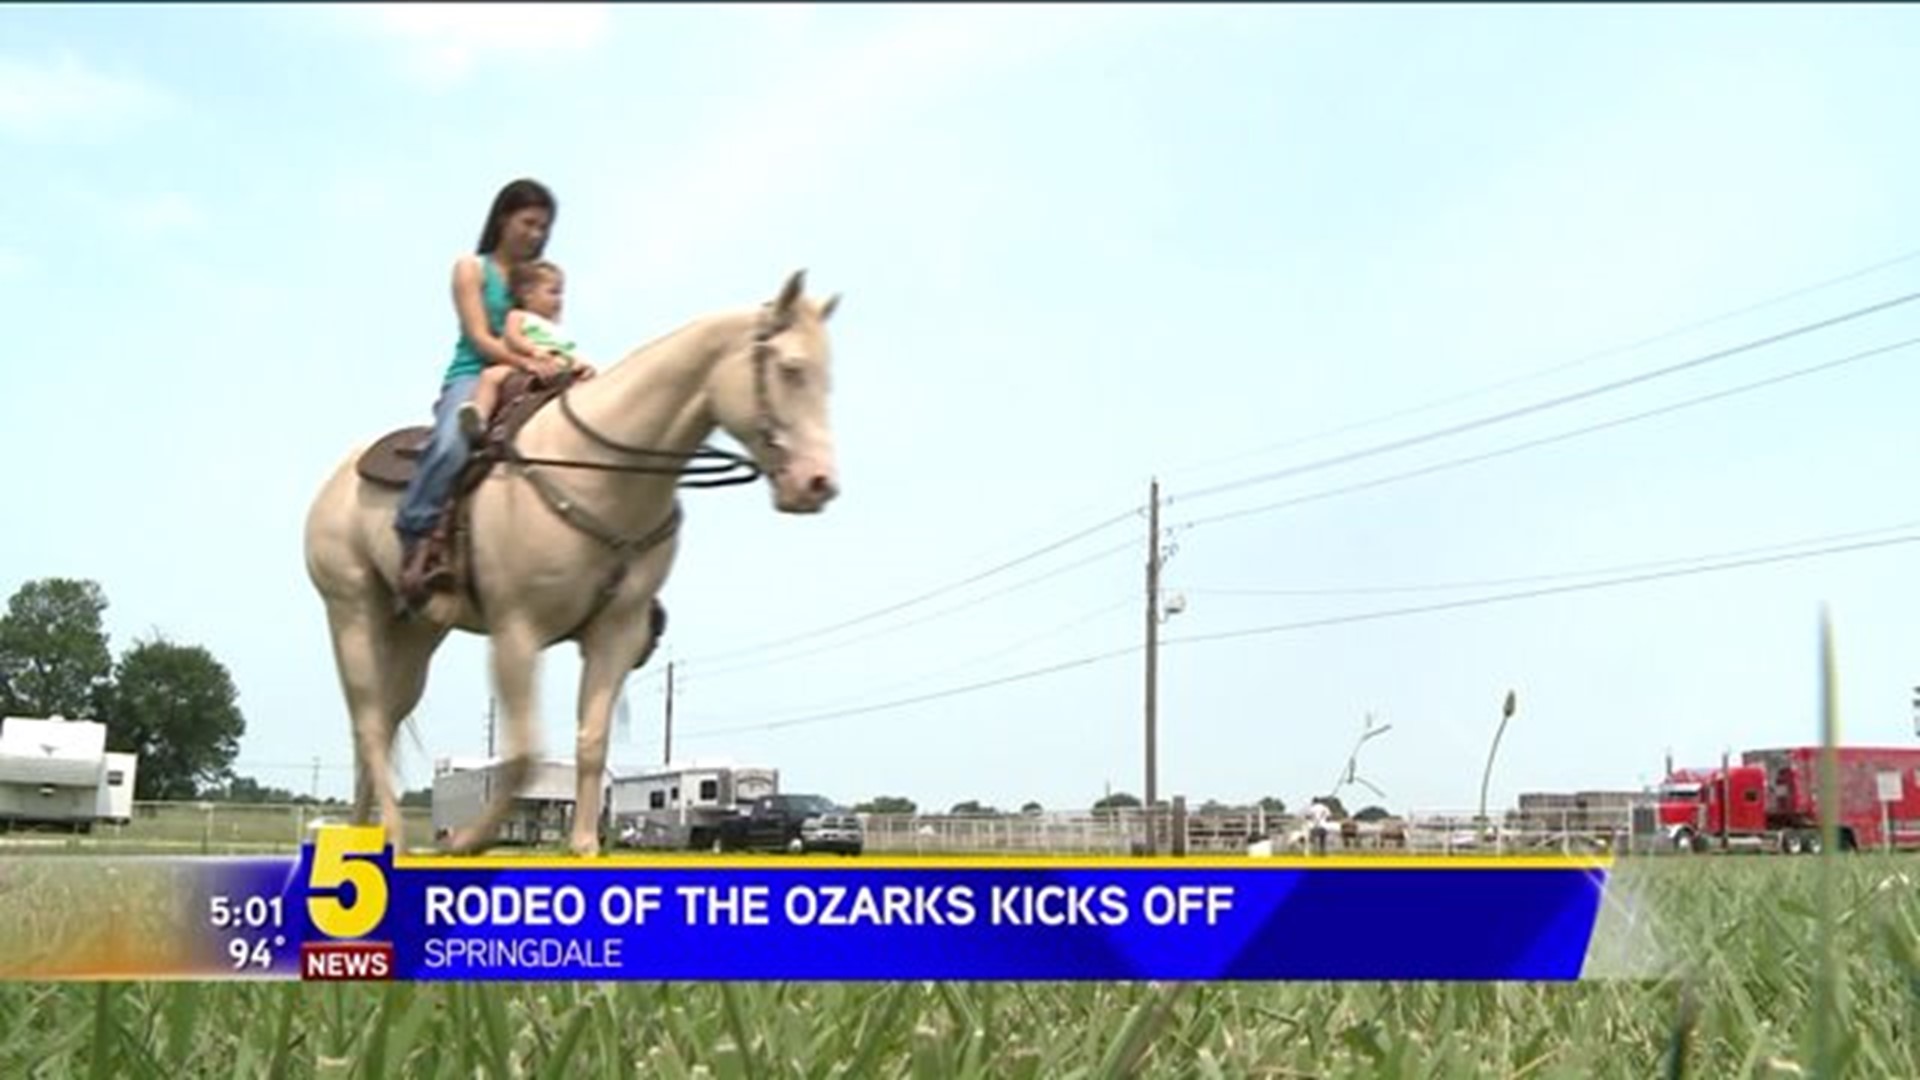 Rodeo Of The Ozarks Kicks Off